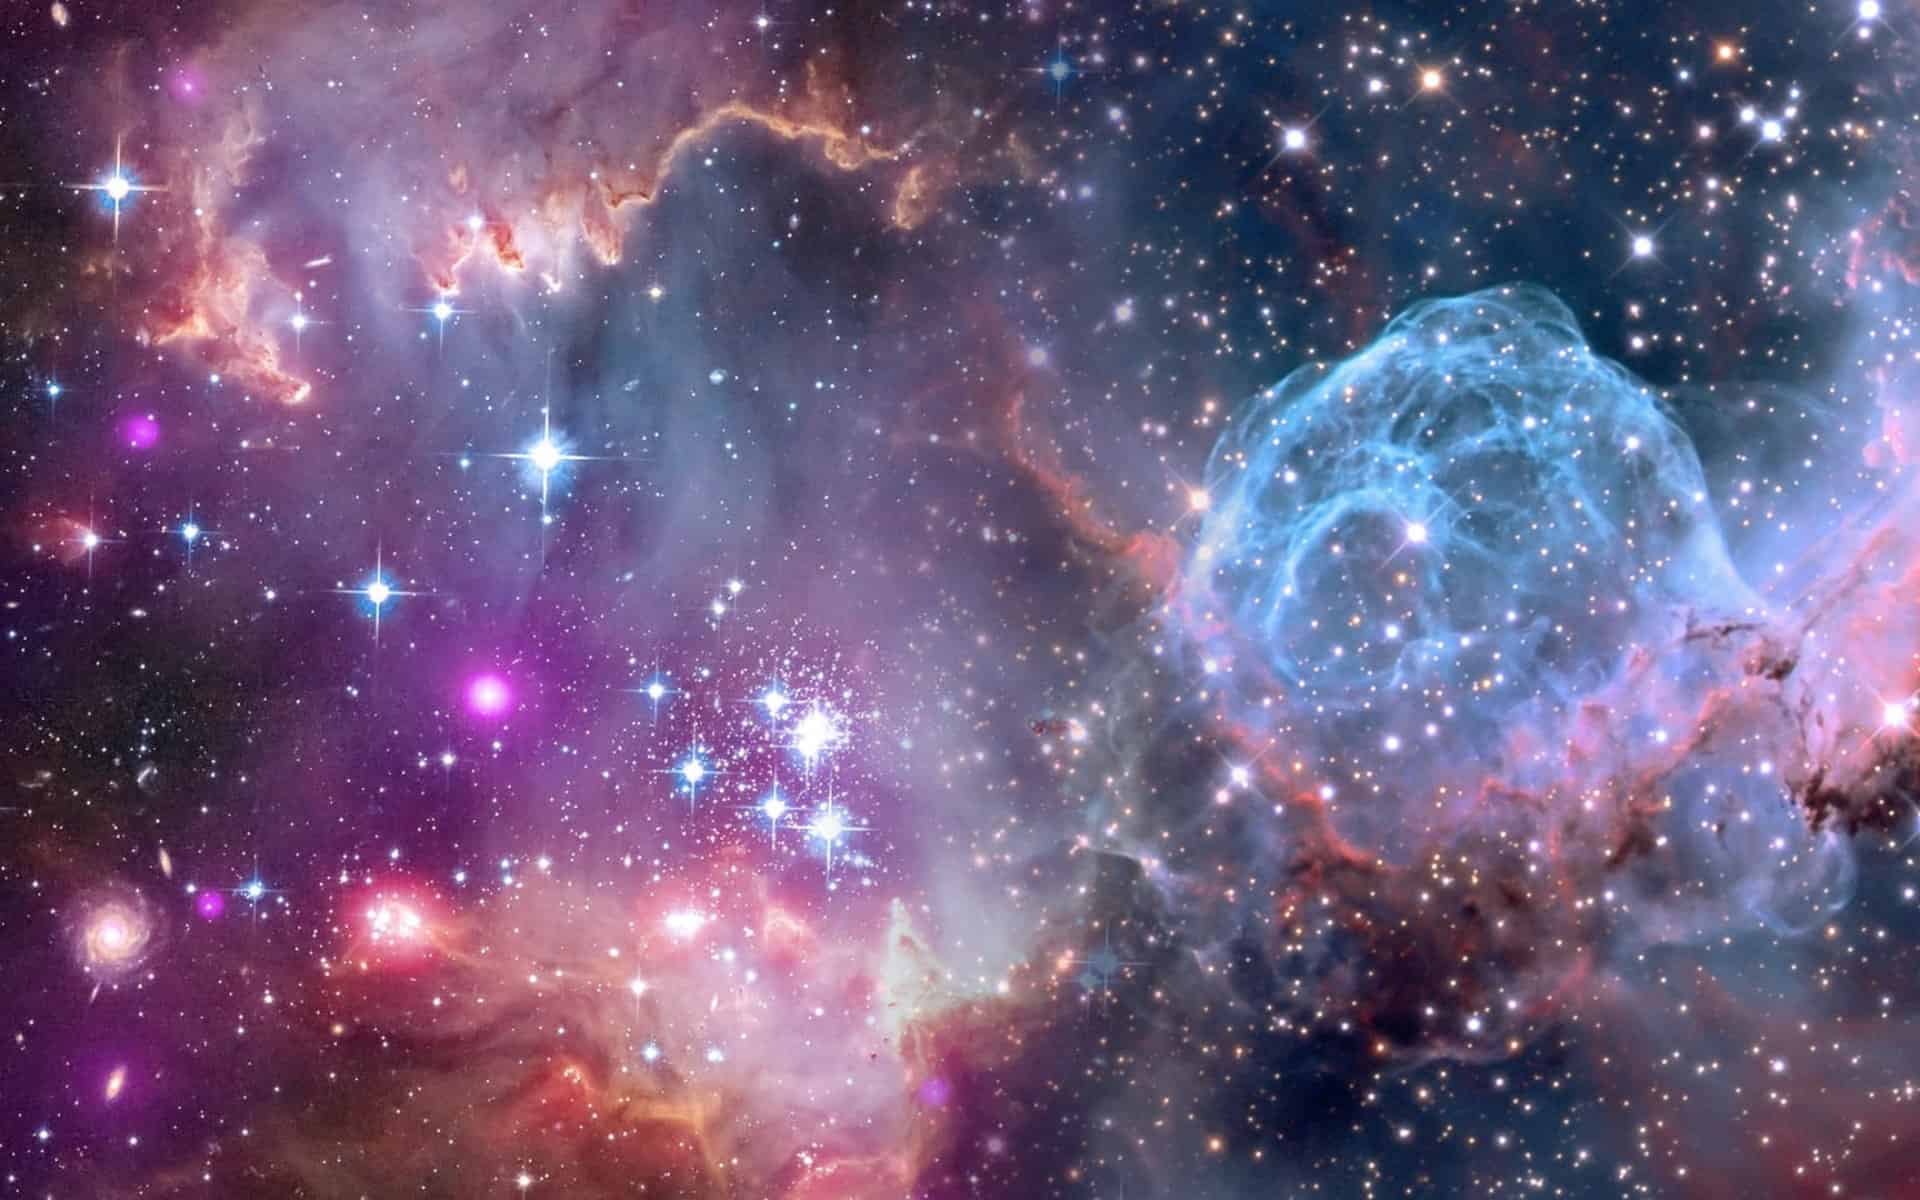 Image shows a colorful cloud of gases such as often depict outer space.